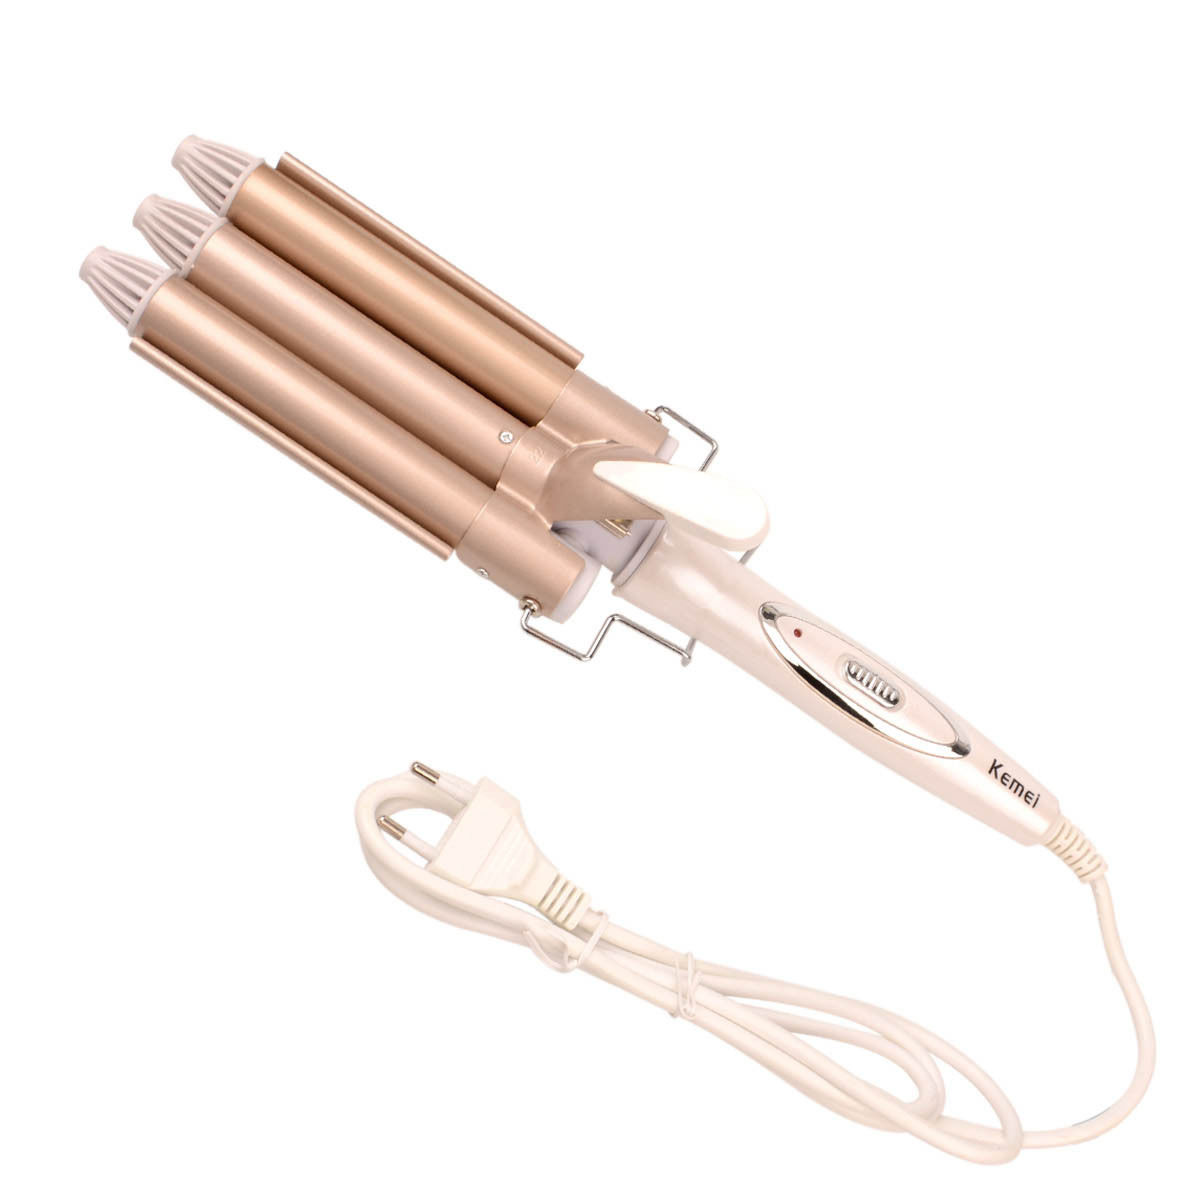 3 Barrels Automatic Hair Curler Ceramic Large Wave Perm Splint Curling Rollers Iron Styling Tools